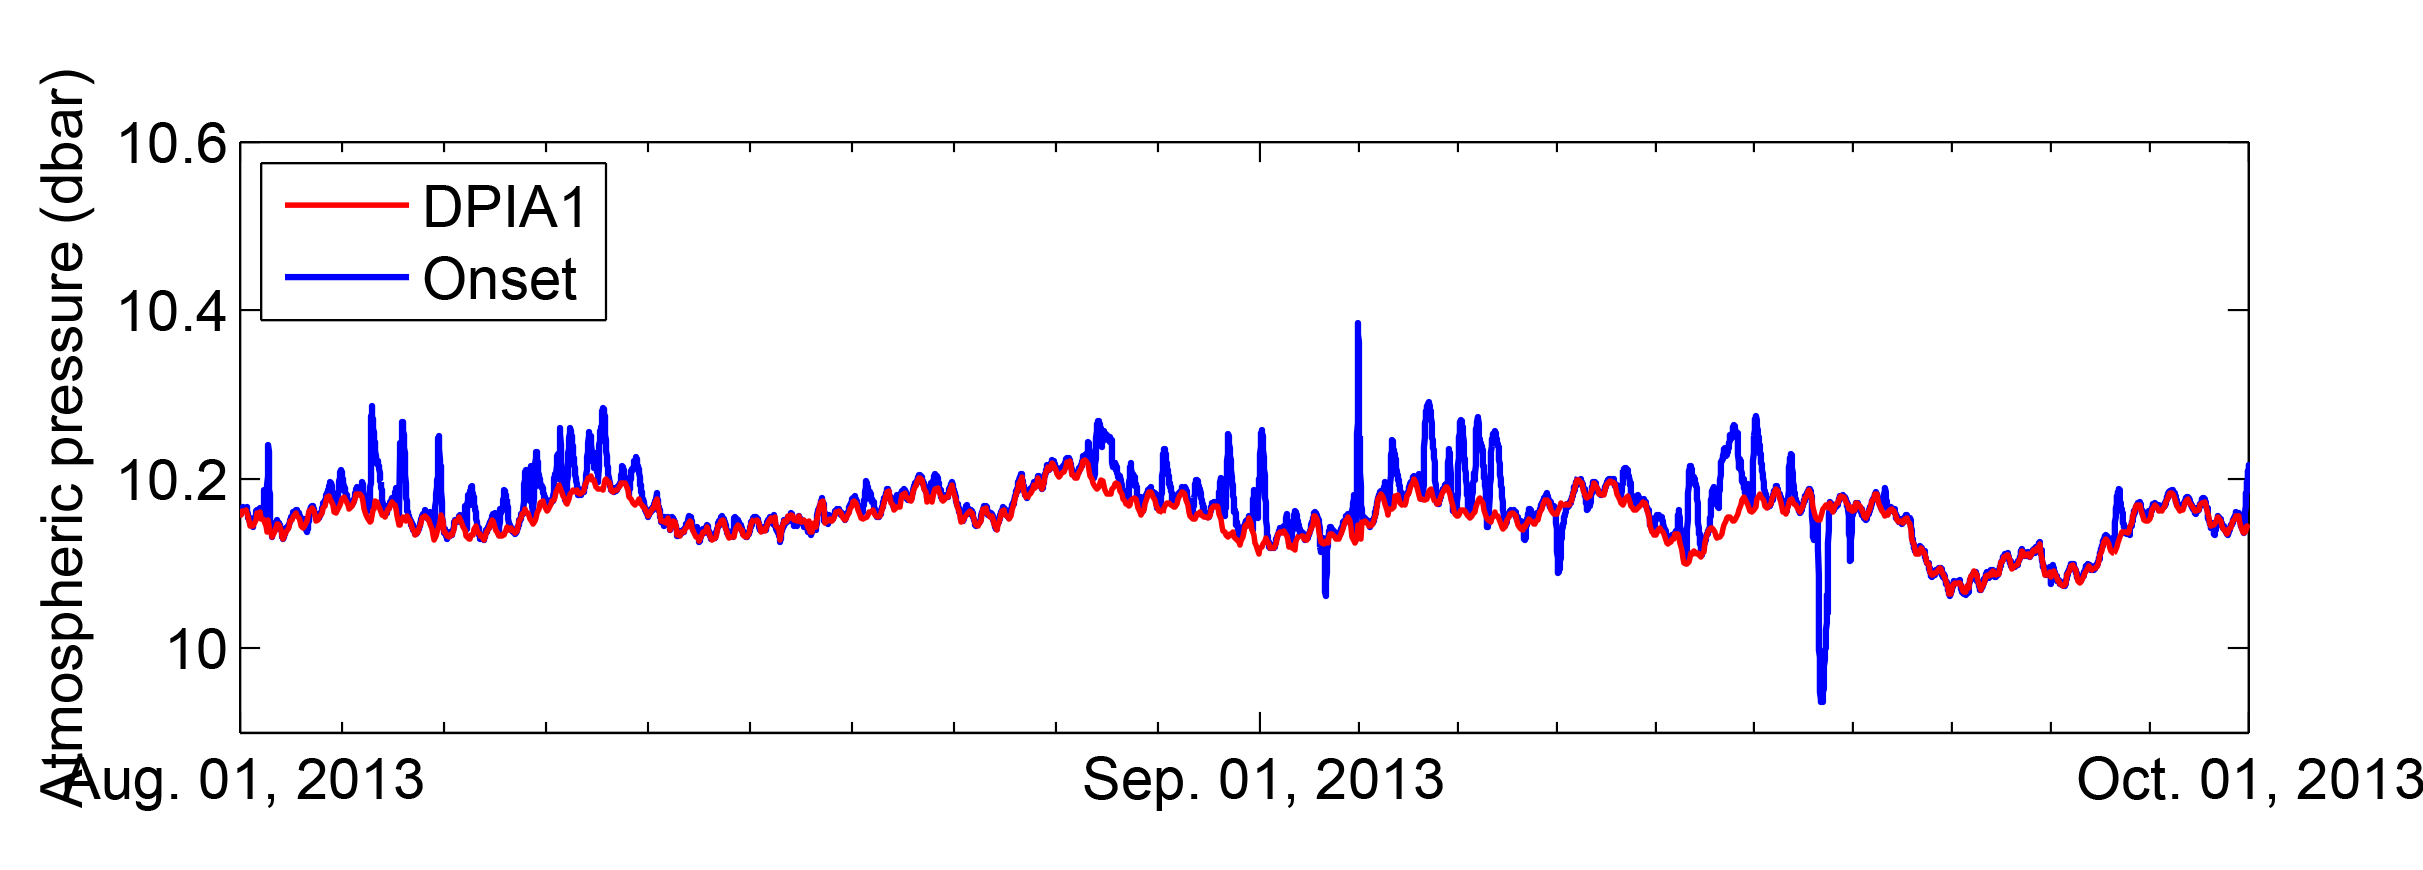  Atmospheric pressure time series from National Oceanic and Atmospheric Administration station DPIA1 and USGS measurements from an Onset Hobo U20 pressure sensor at site 965 on Dauphin Island, Alabama, in 2013.